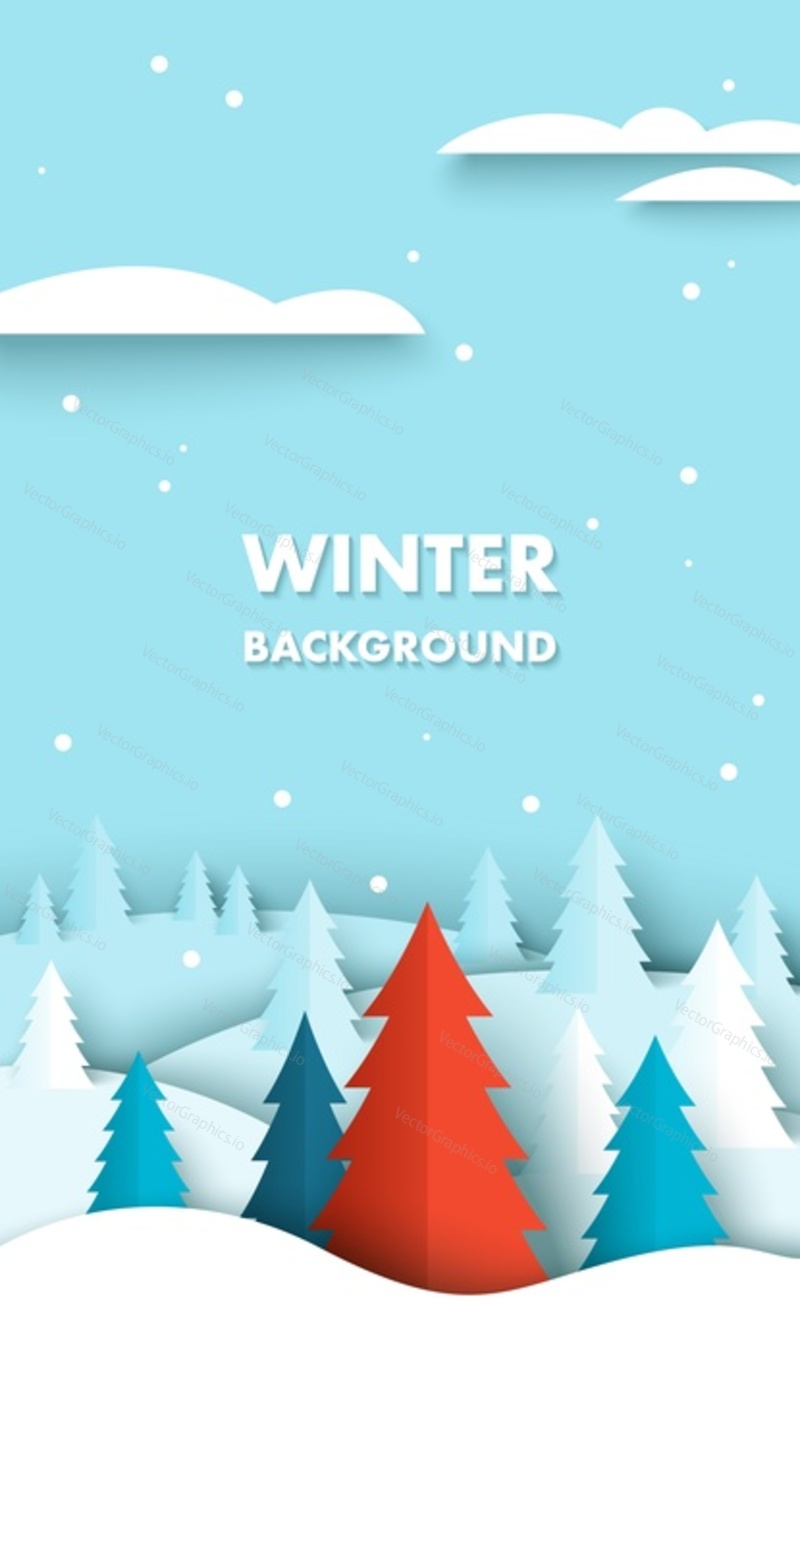 Winter background with coniferous trees vector illustration in paper cut craft art origami style. White blue and red fir spruce forest under snowfall 3d design. Christmas and new year holiday concept